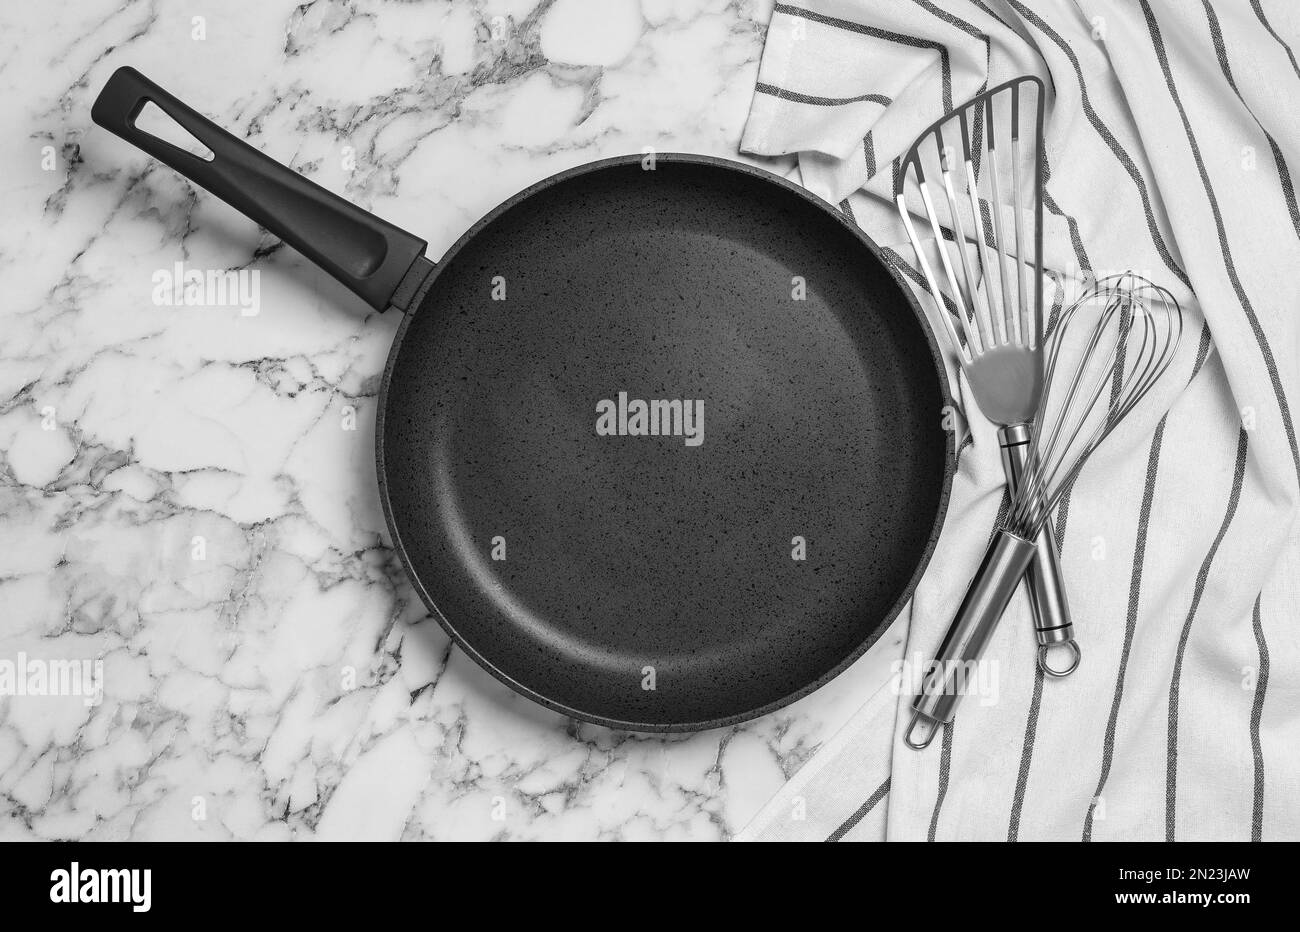 Frying pan, cooking utensils and tablecloth on white marble background, flat lay Stock Photo